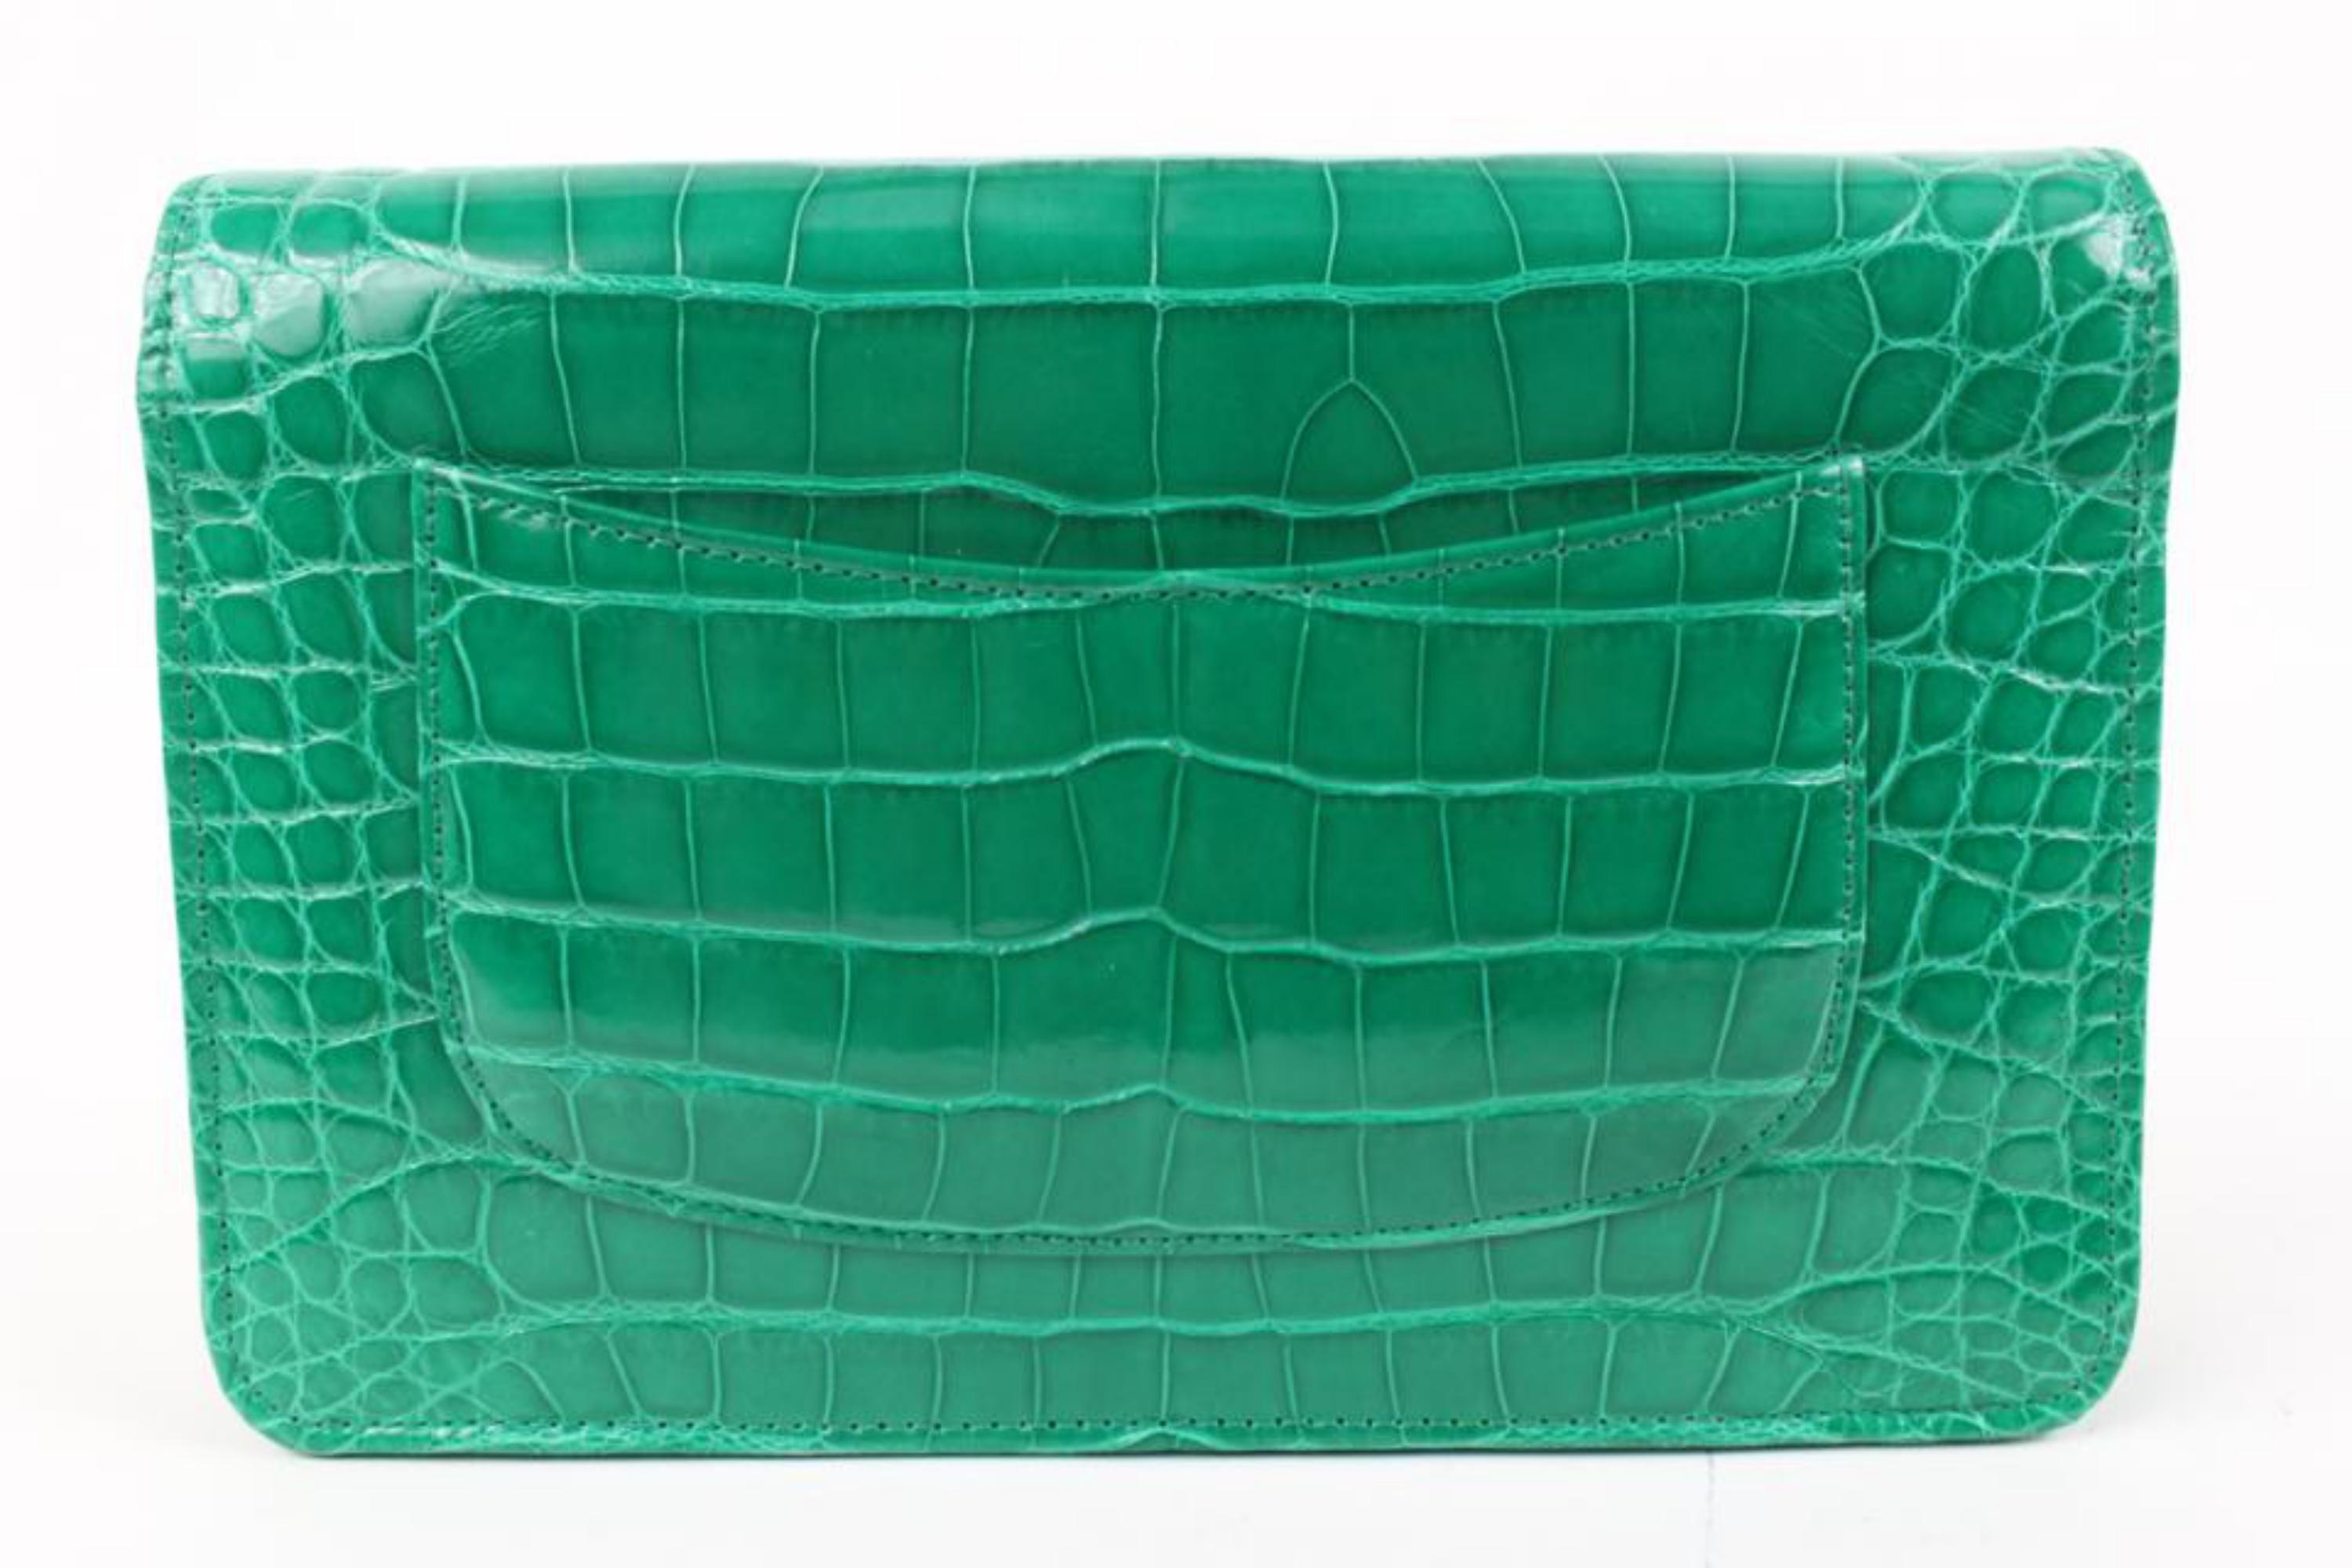 Women's Chanel Ultra Rare Emerald Green Alligator Wallet on Chain SHW WOC 46cz414s For Sale